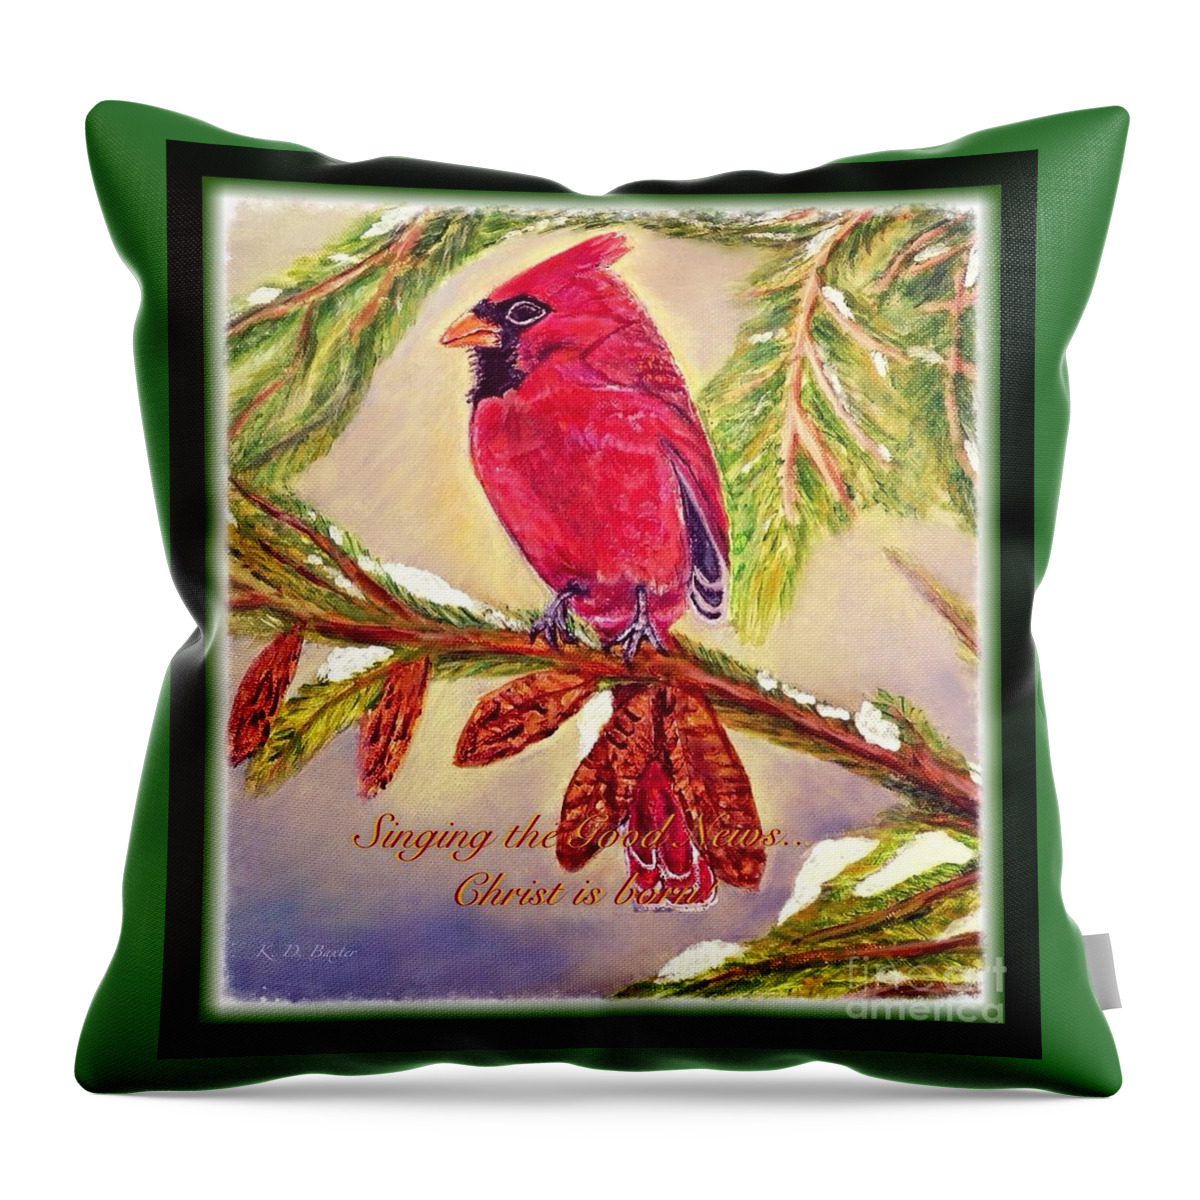 Male Red Cardianl Perched On A Evergreen Tree Branch With Pinecones Snow Beginning To Melt Light Filtering In With Blue Skies Behind It Border Christmas Image Christmas Message Nature Paintings Cardinal Birdaintings Acrylic Paintings Throw Pillow featuring the painting Singing the Good News with a Christmas message by Kimberlee Baxter